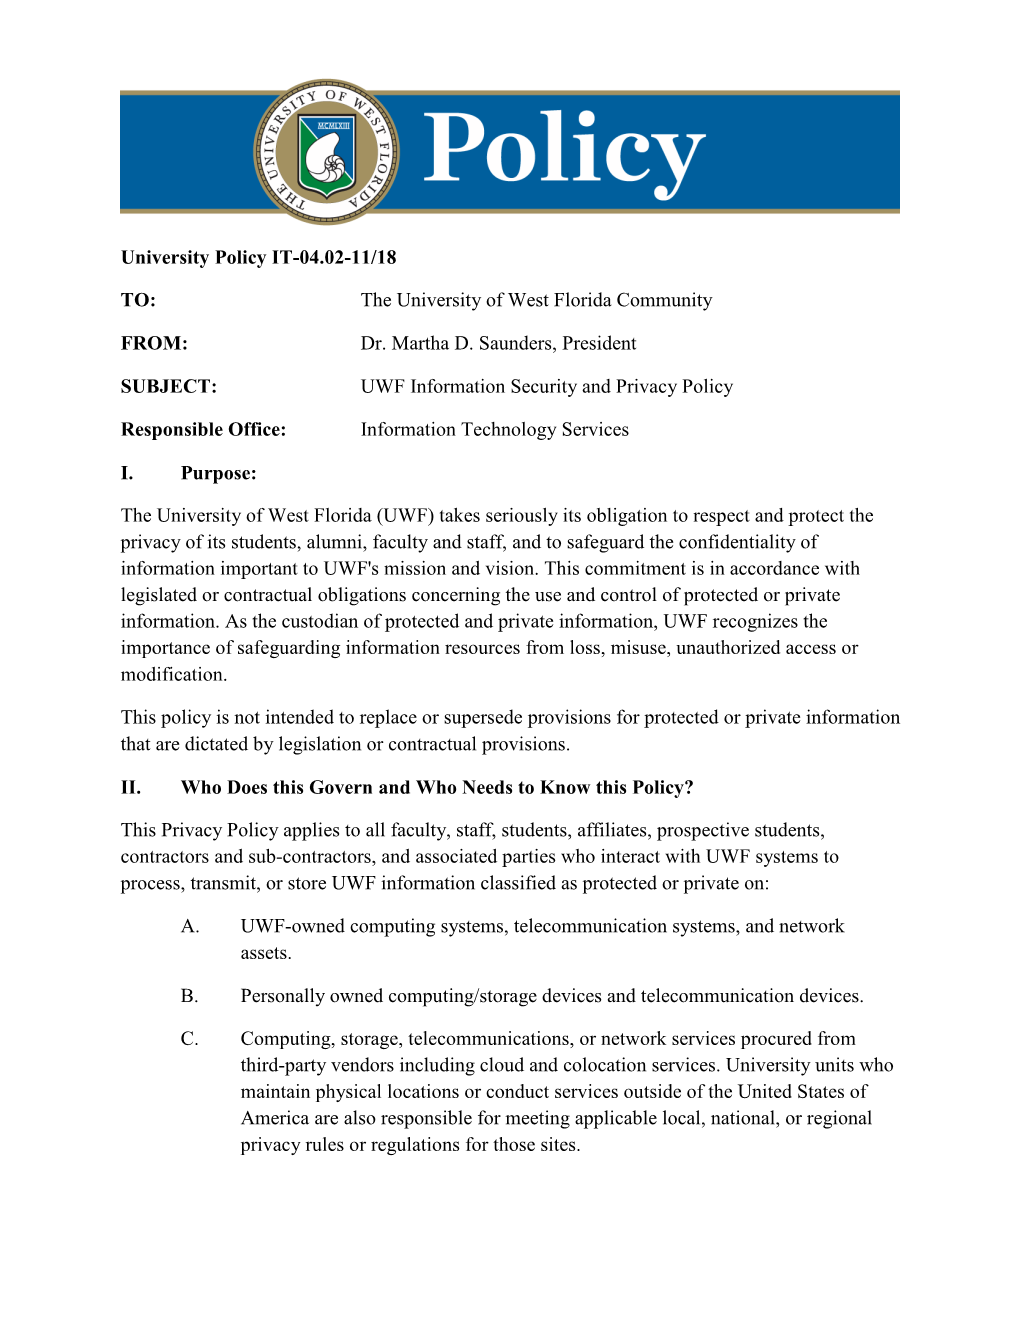 University Policy IT-04.02-11/18 TO: the University of West Florida